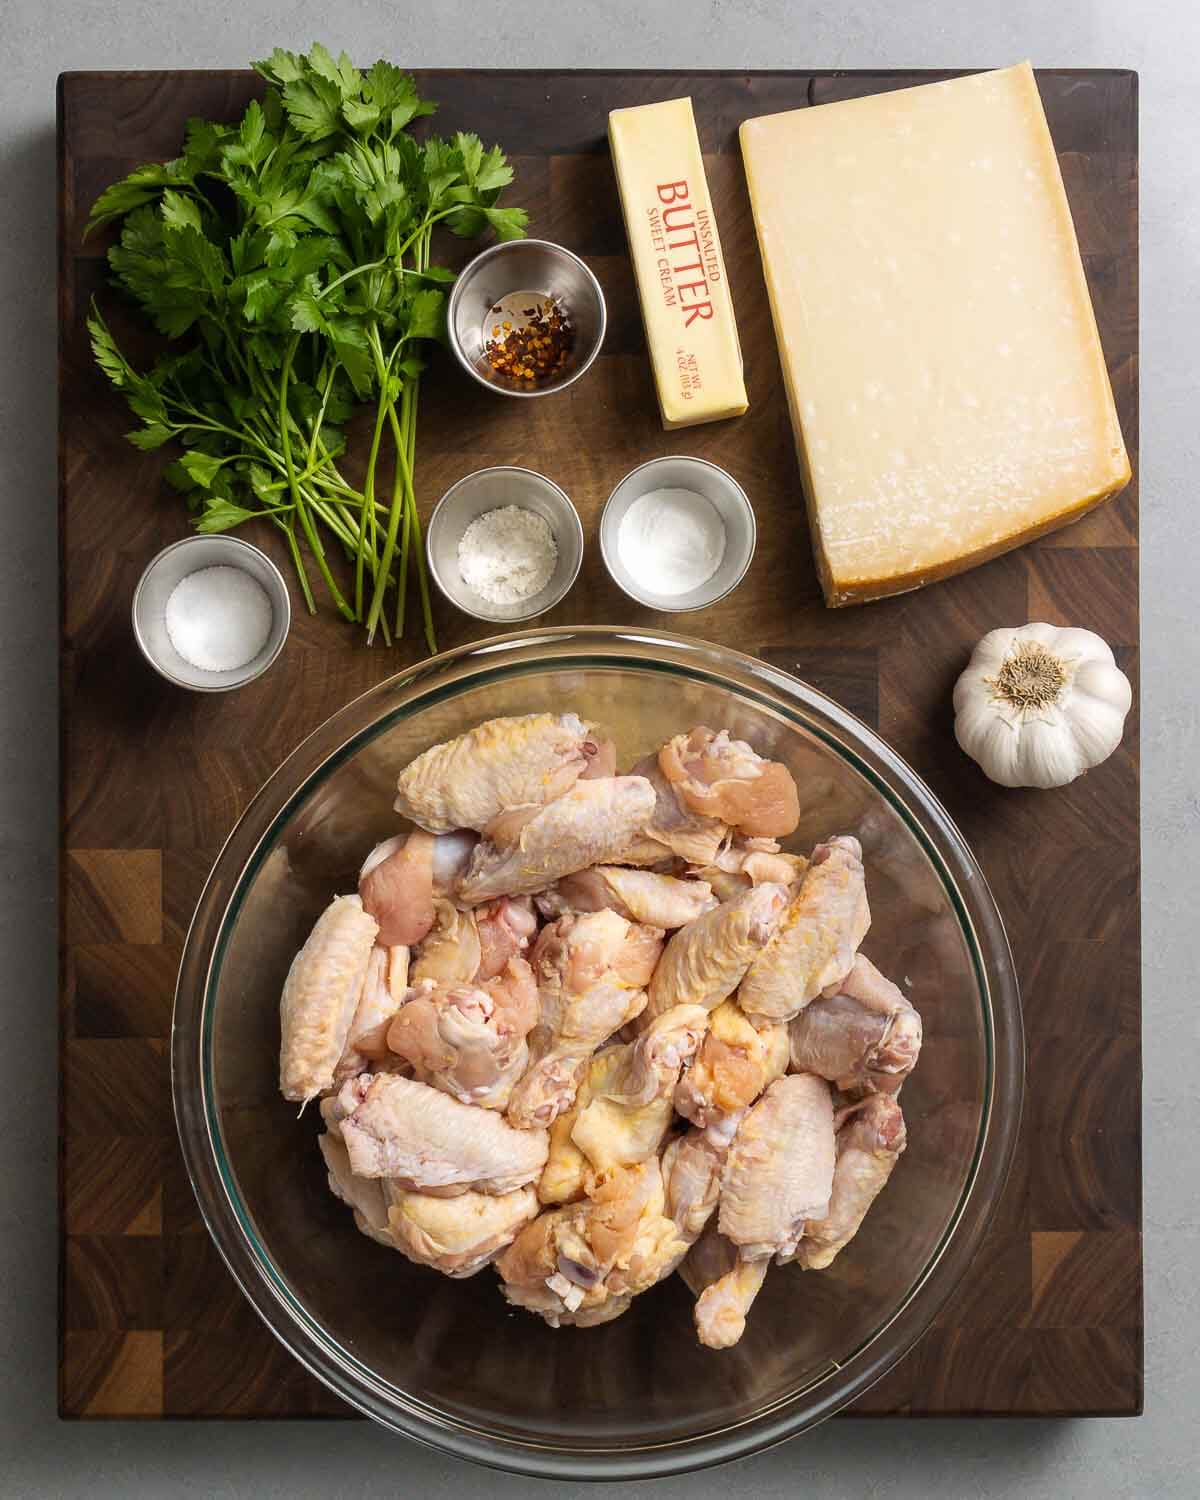 Ingredients shown: parsley, salt, flour, baking powder, butter, parmesan cheese, garlic, and party wings.